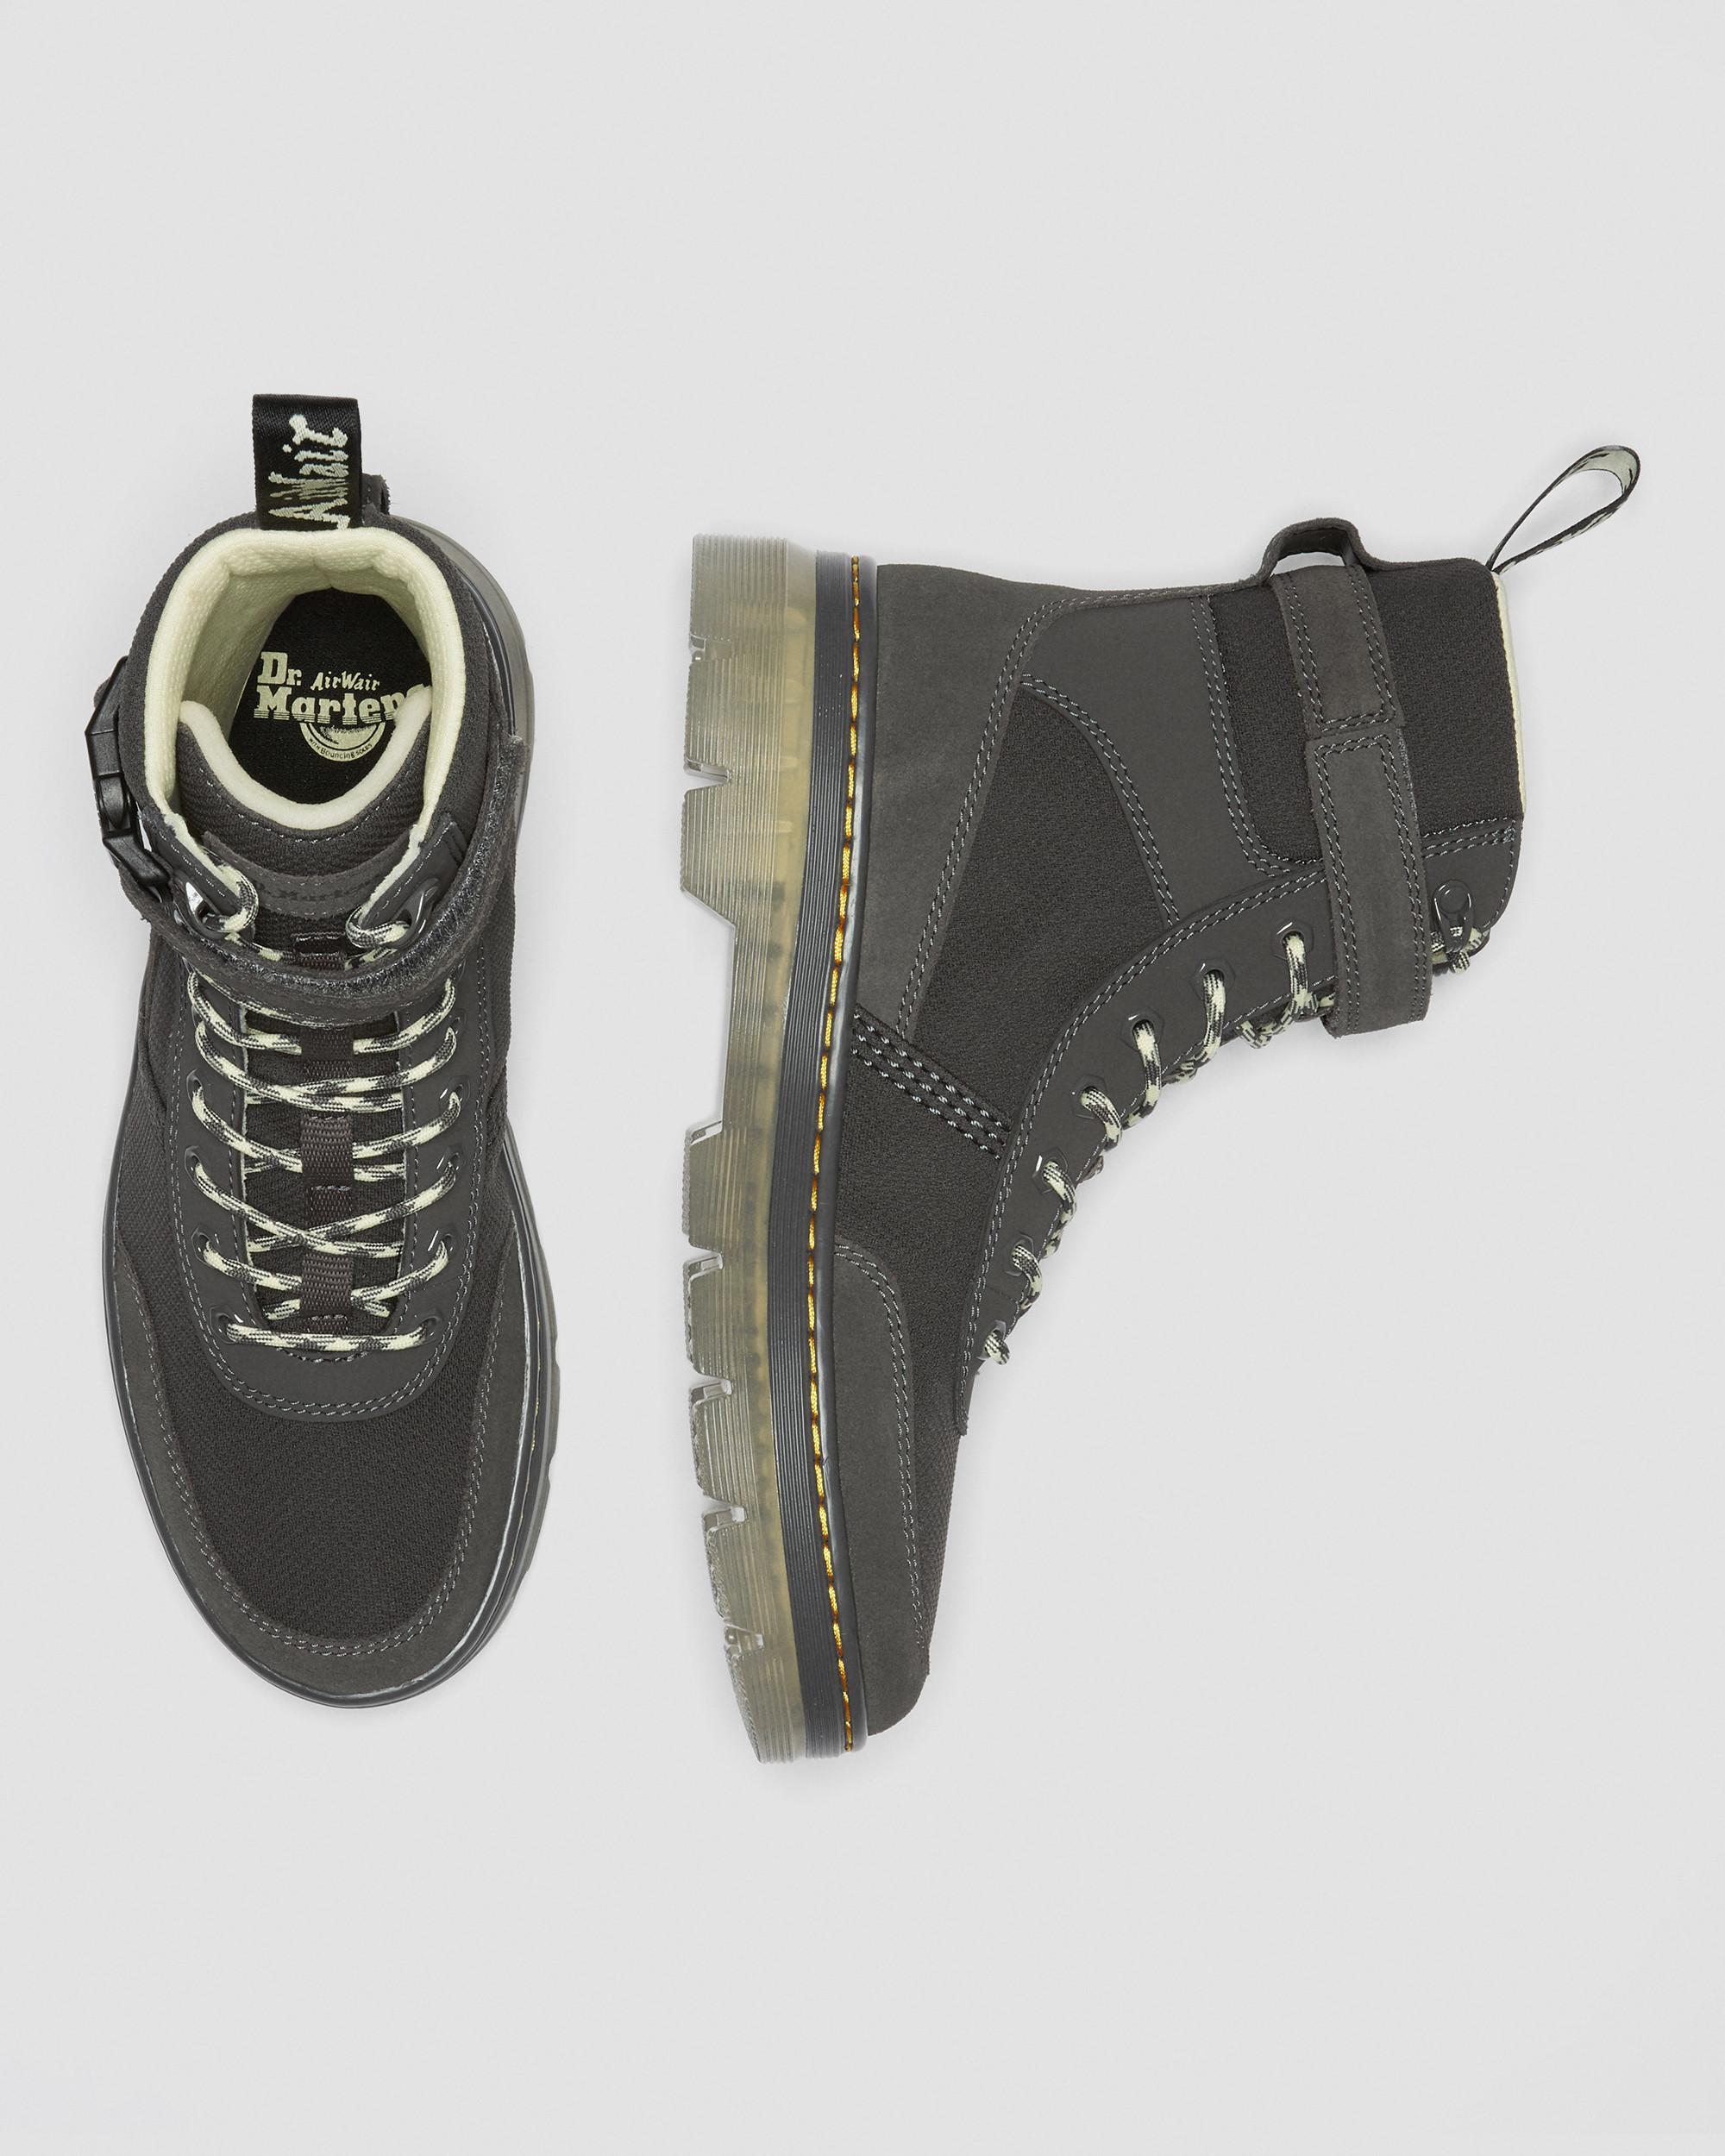 Combs Tech Iced Casual Boots in Gunmetal